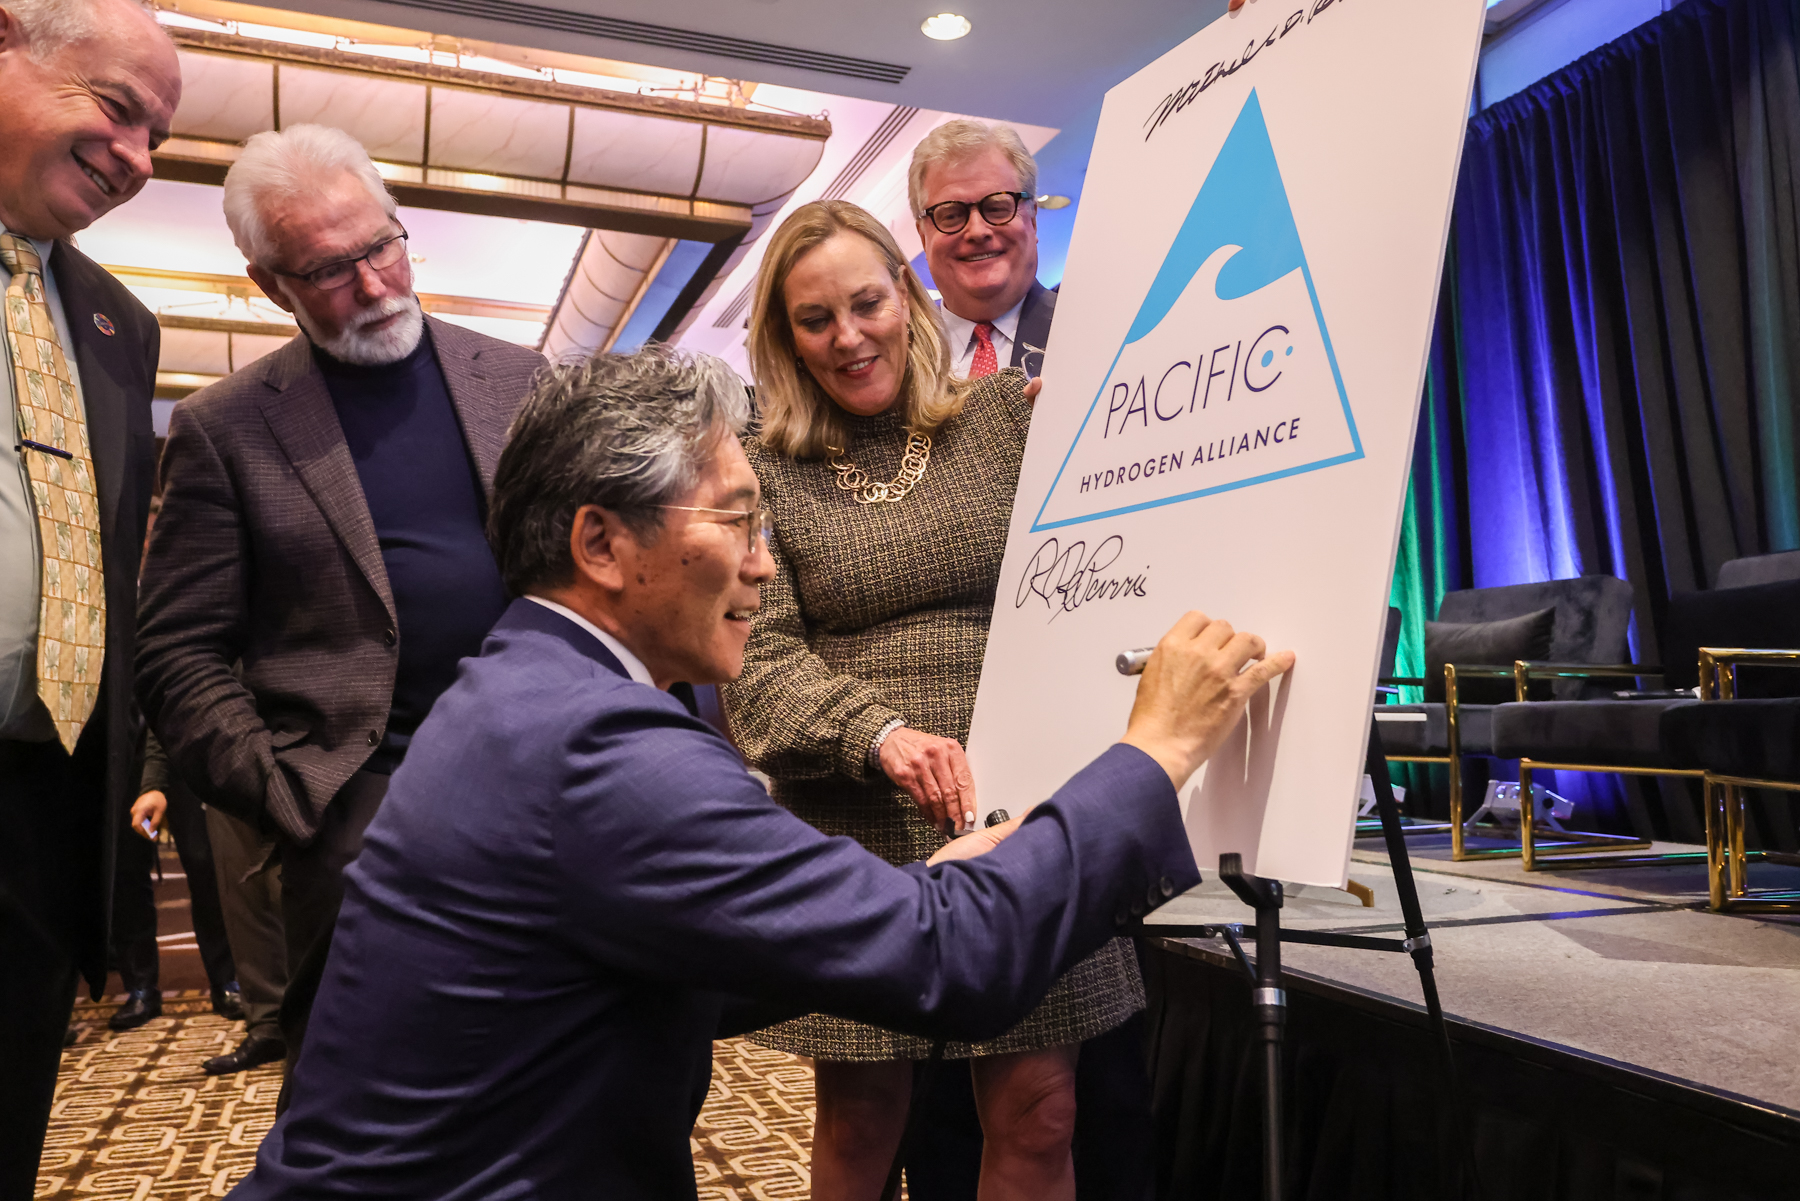 Lancaster Mayor R. Rex Parris,  Hawaii County Mayor Mitch Roth, LA County Supervisor Kathryn Barger, Enso Infrastructure's Lex Heslin watching Mayor of Namie Town Japan Eiko Yoshida sign Pacific Hydrogen Alliance recognition